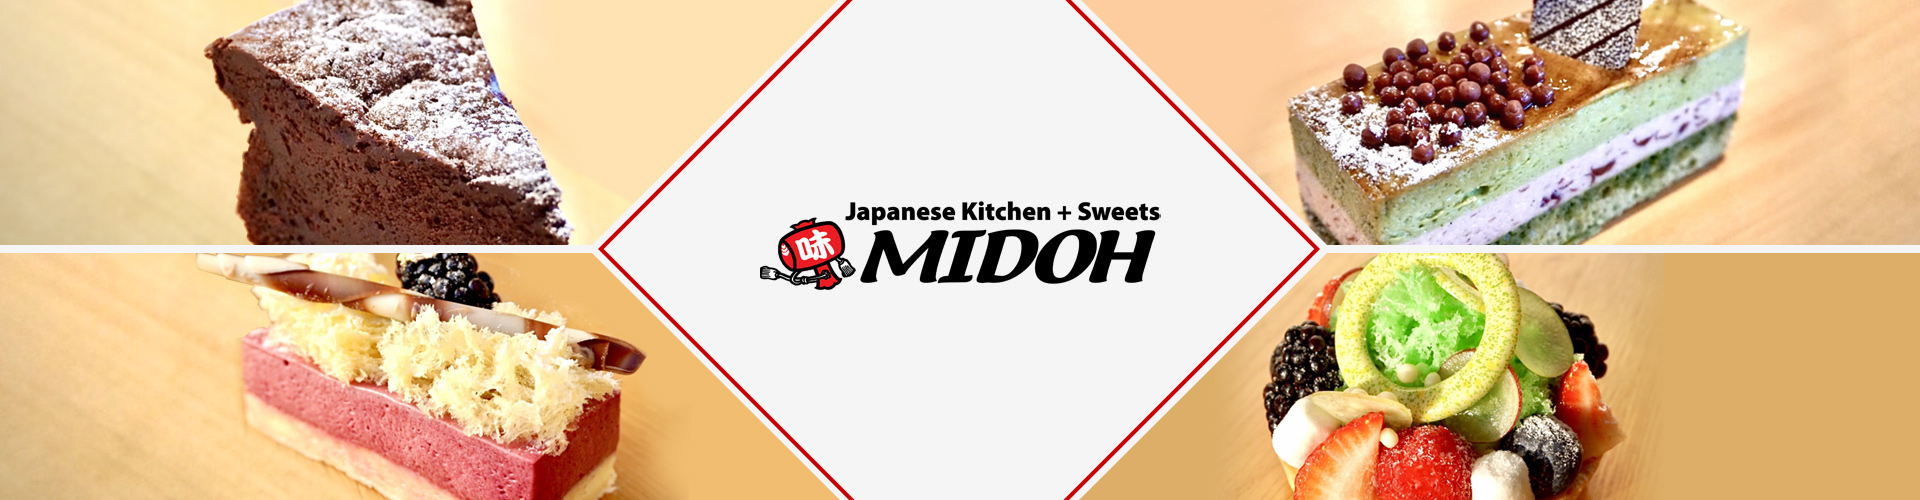 Japanese Kitchen + Sweets MIDOH